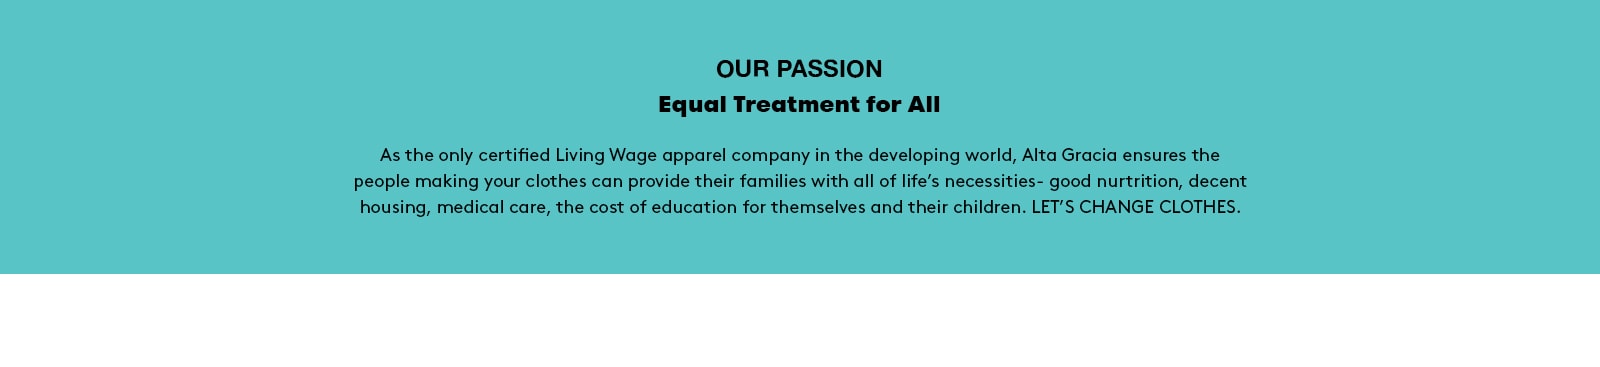 Our passion. Equal treatment for all. As the only certified Living Wage apparel company in the developing world, Alta Gracia ensures the people making your clothes can provide their families with all of life’s necessities - good nutrition, decent housing, medical care, the cost of education for themselves and their children. LET’S CHANGE CLOTHES.